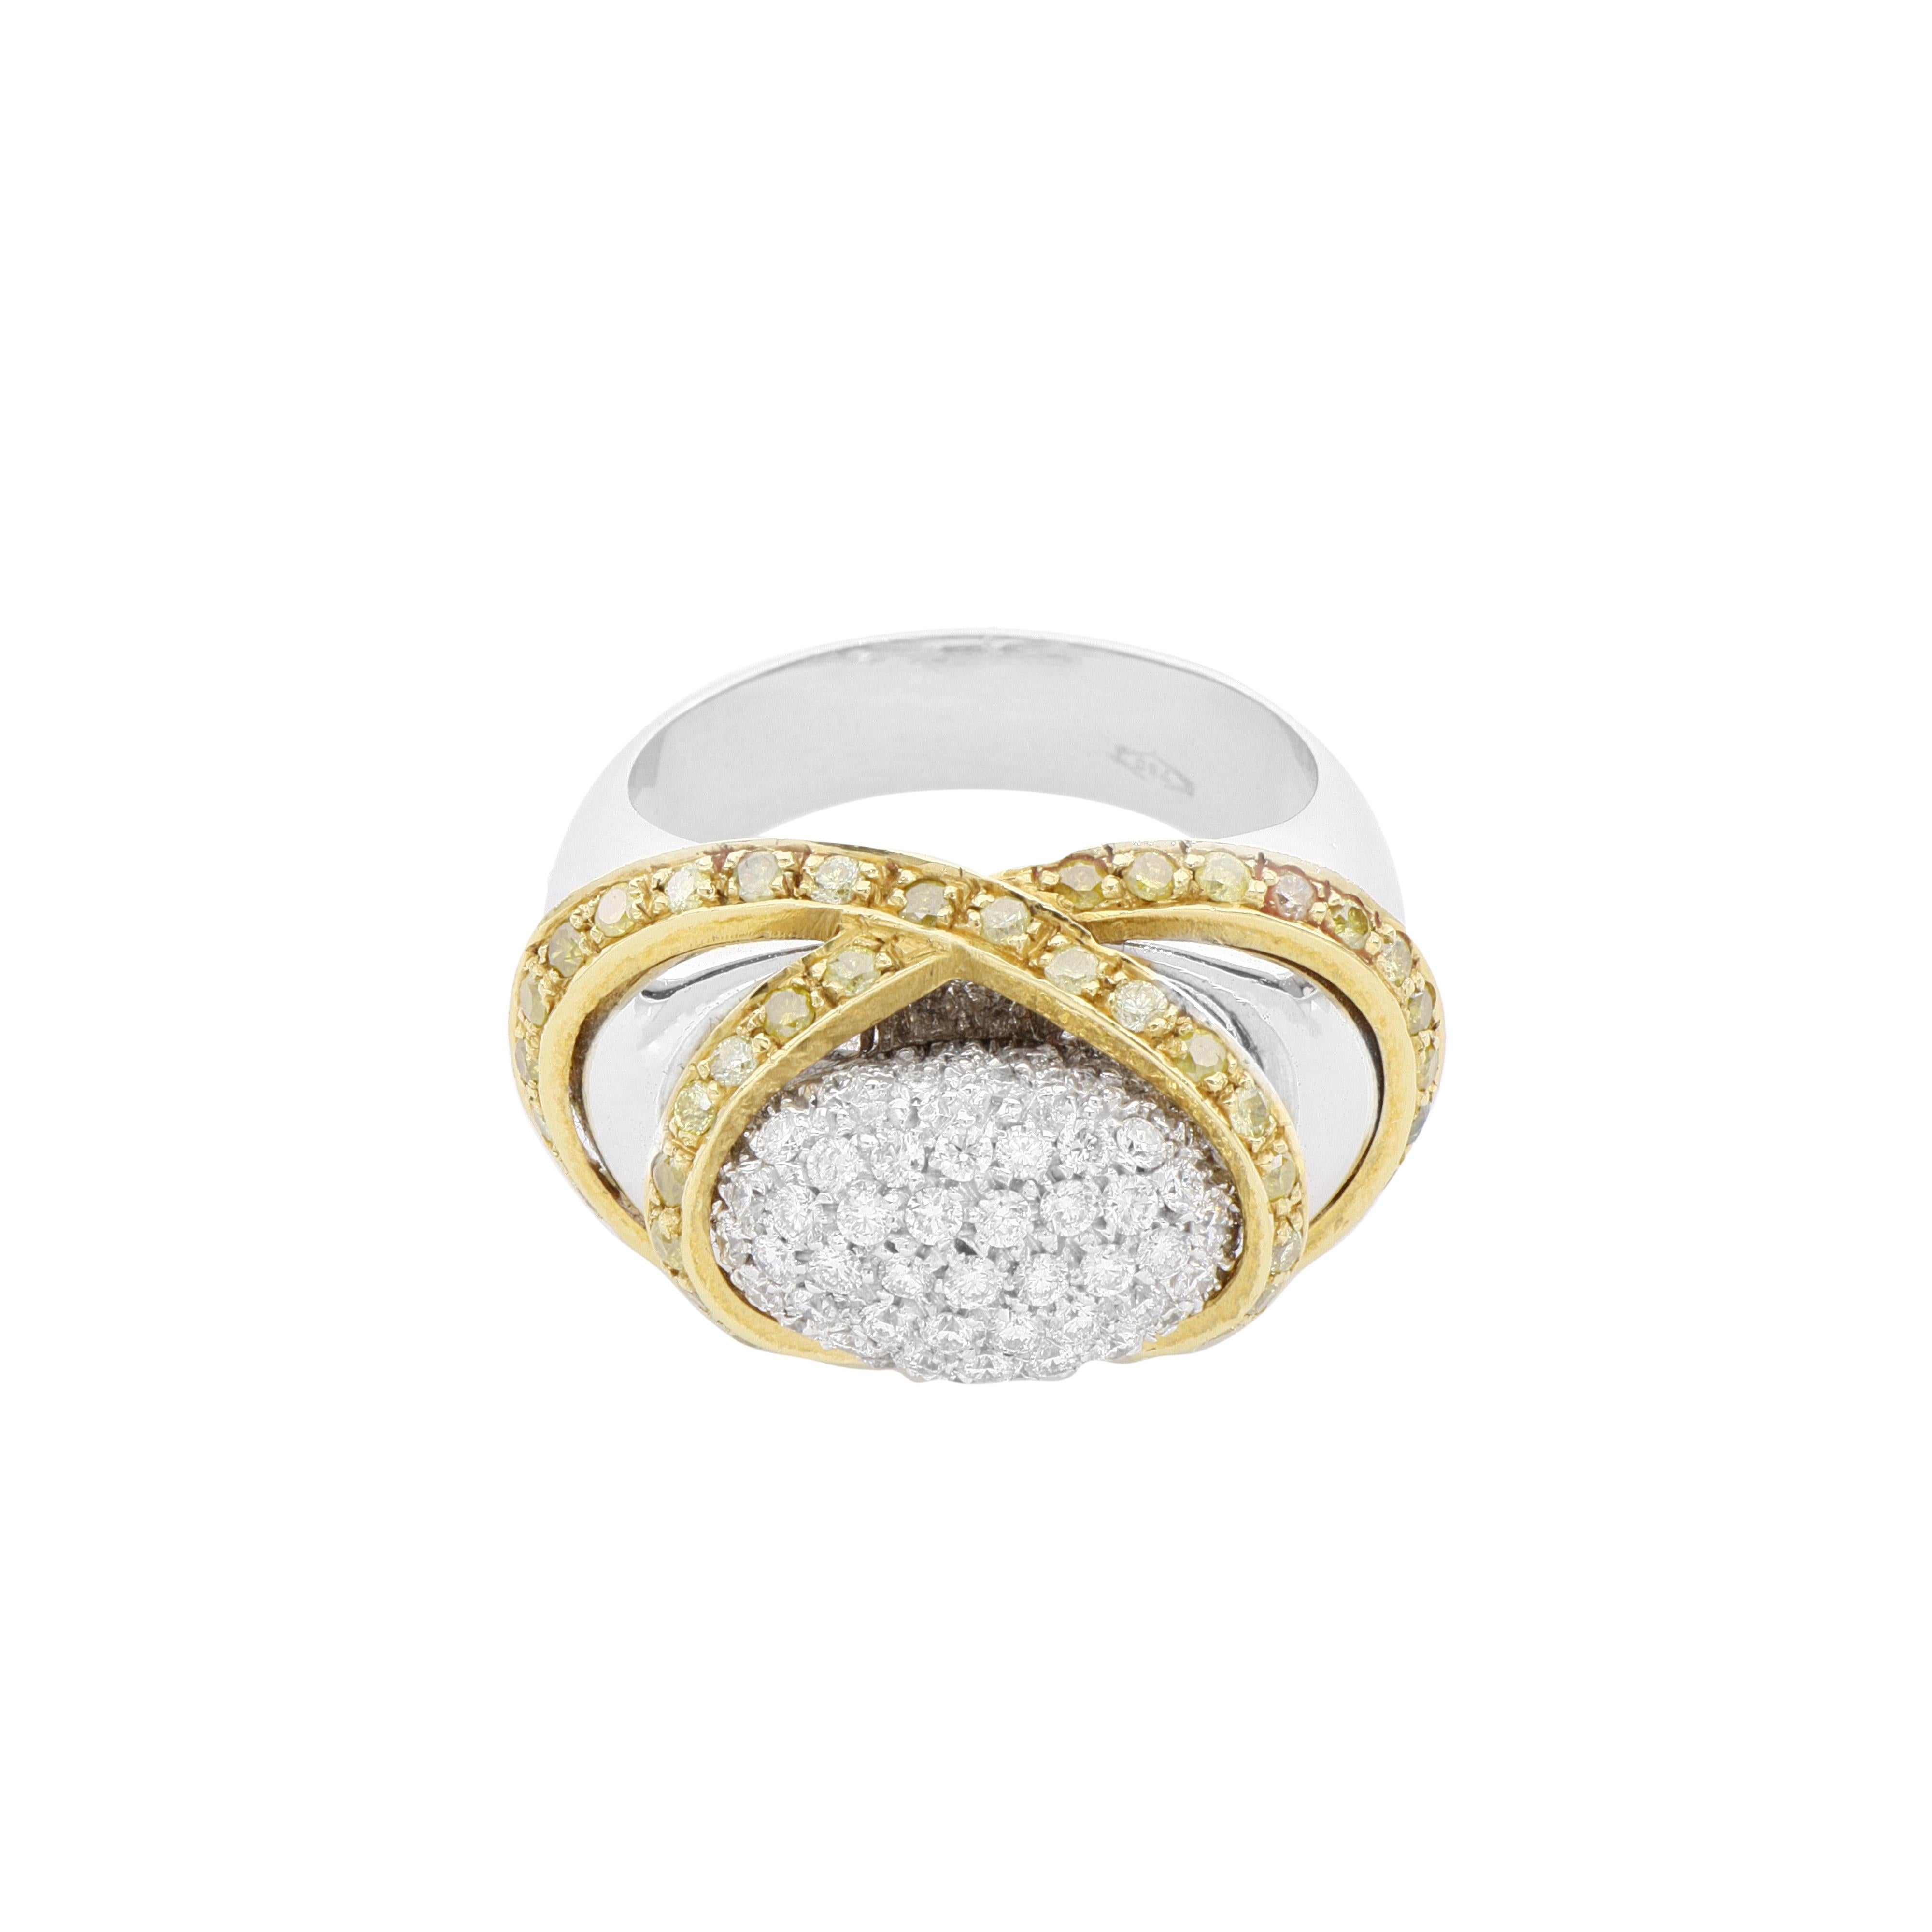 For Sale:  Fancy and colorless diamonds pavè engagement wedding ring 3